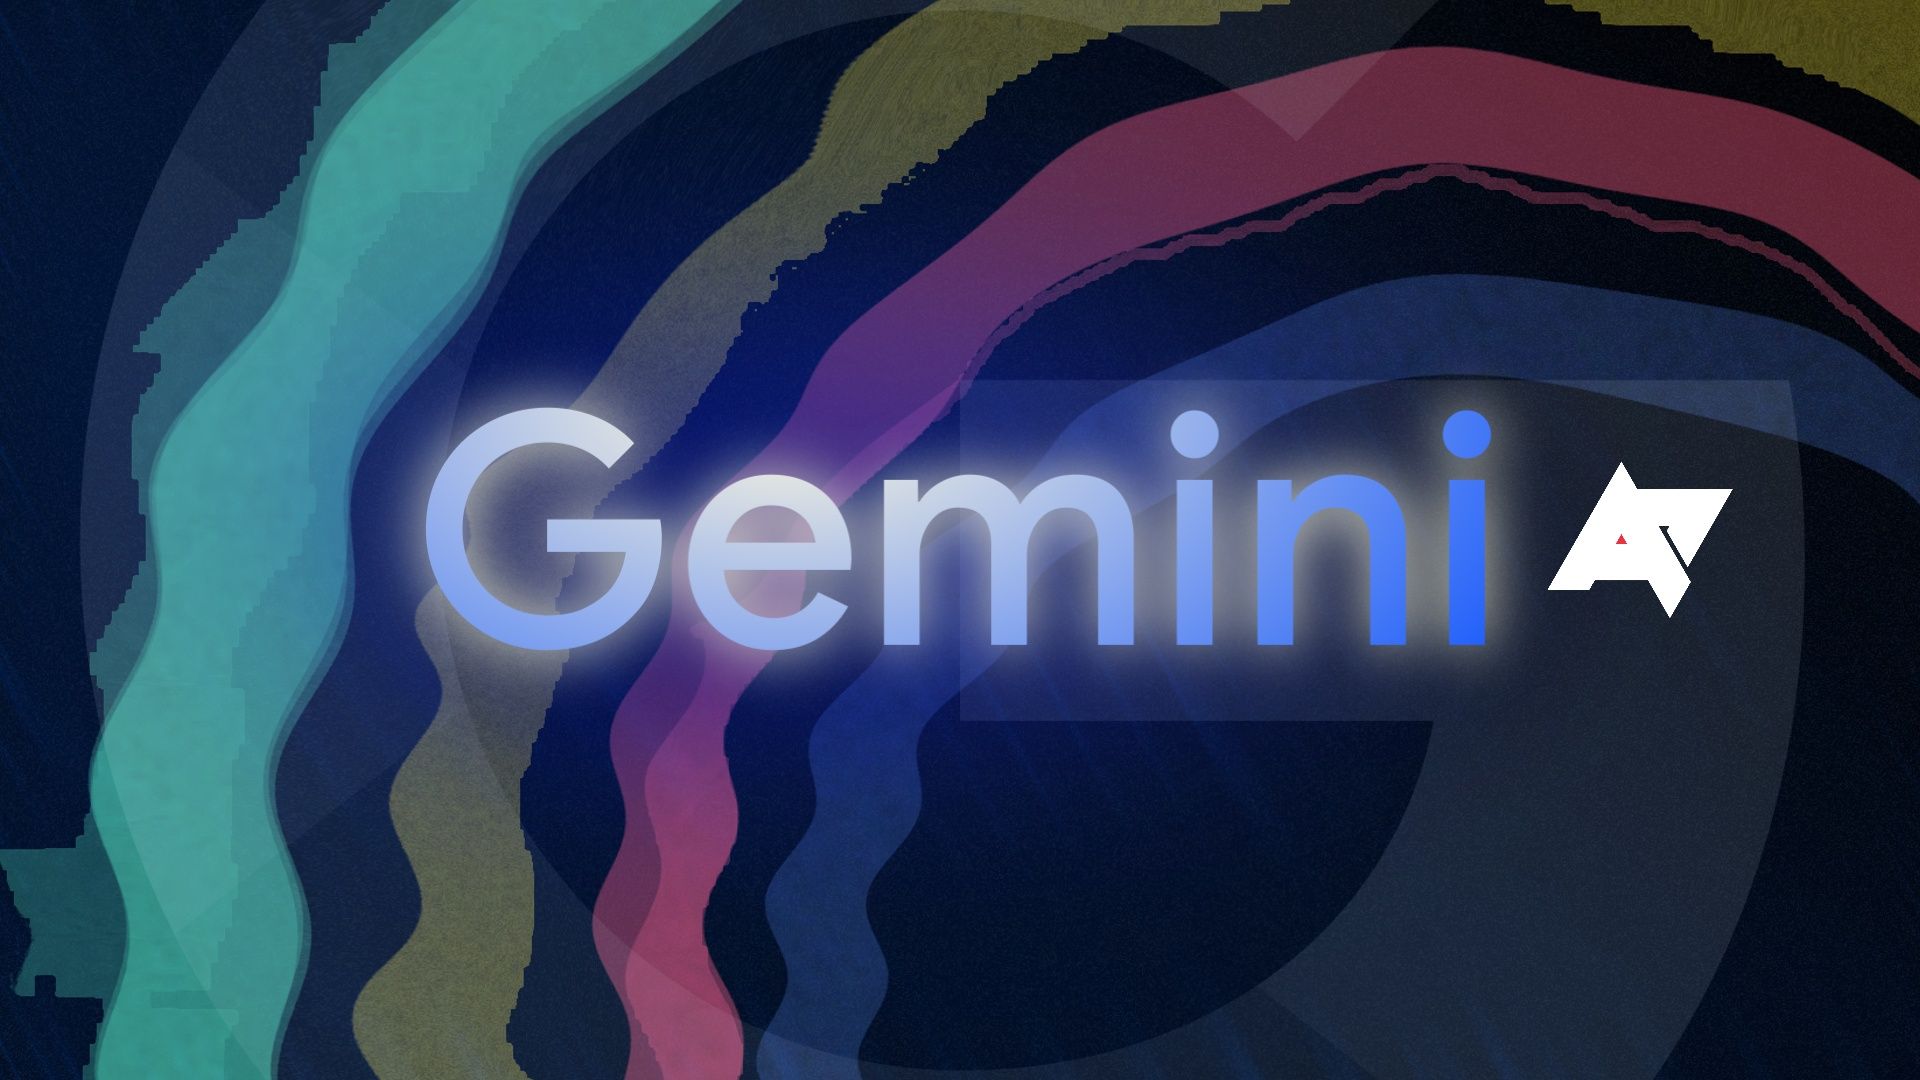 Using the Gemini app automatically disables Google Assistant on Android